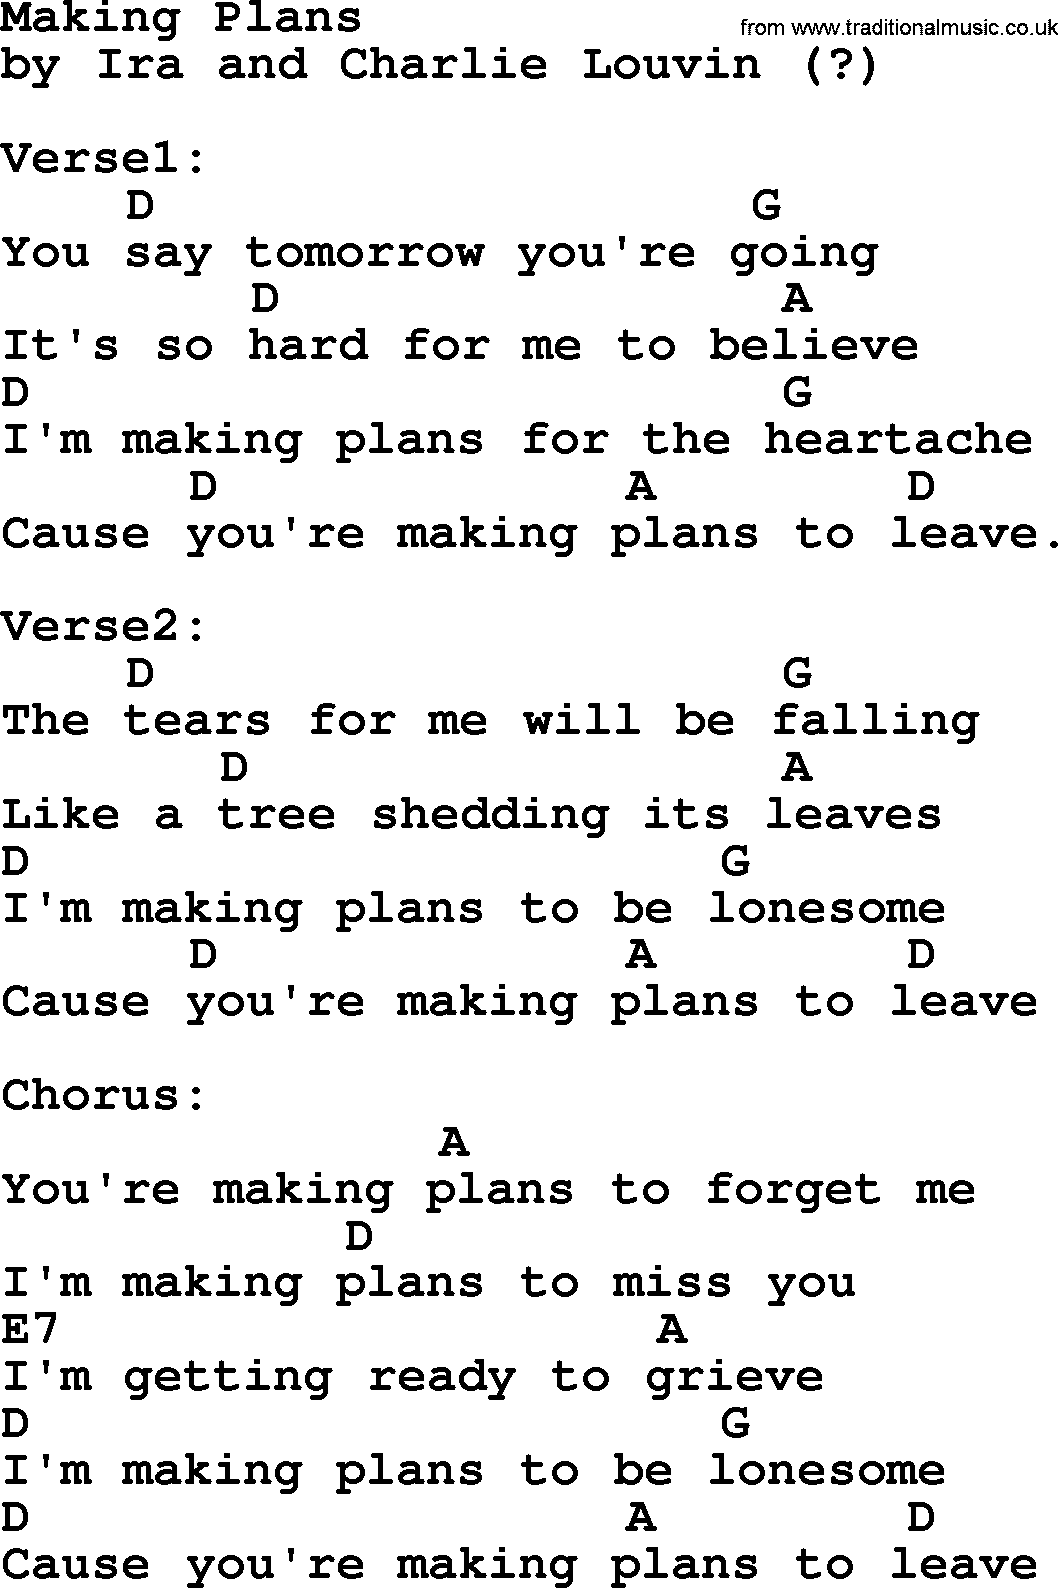 Bluegrass song: Making Plans, lyrics and chords